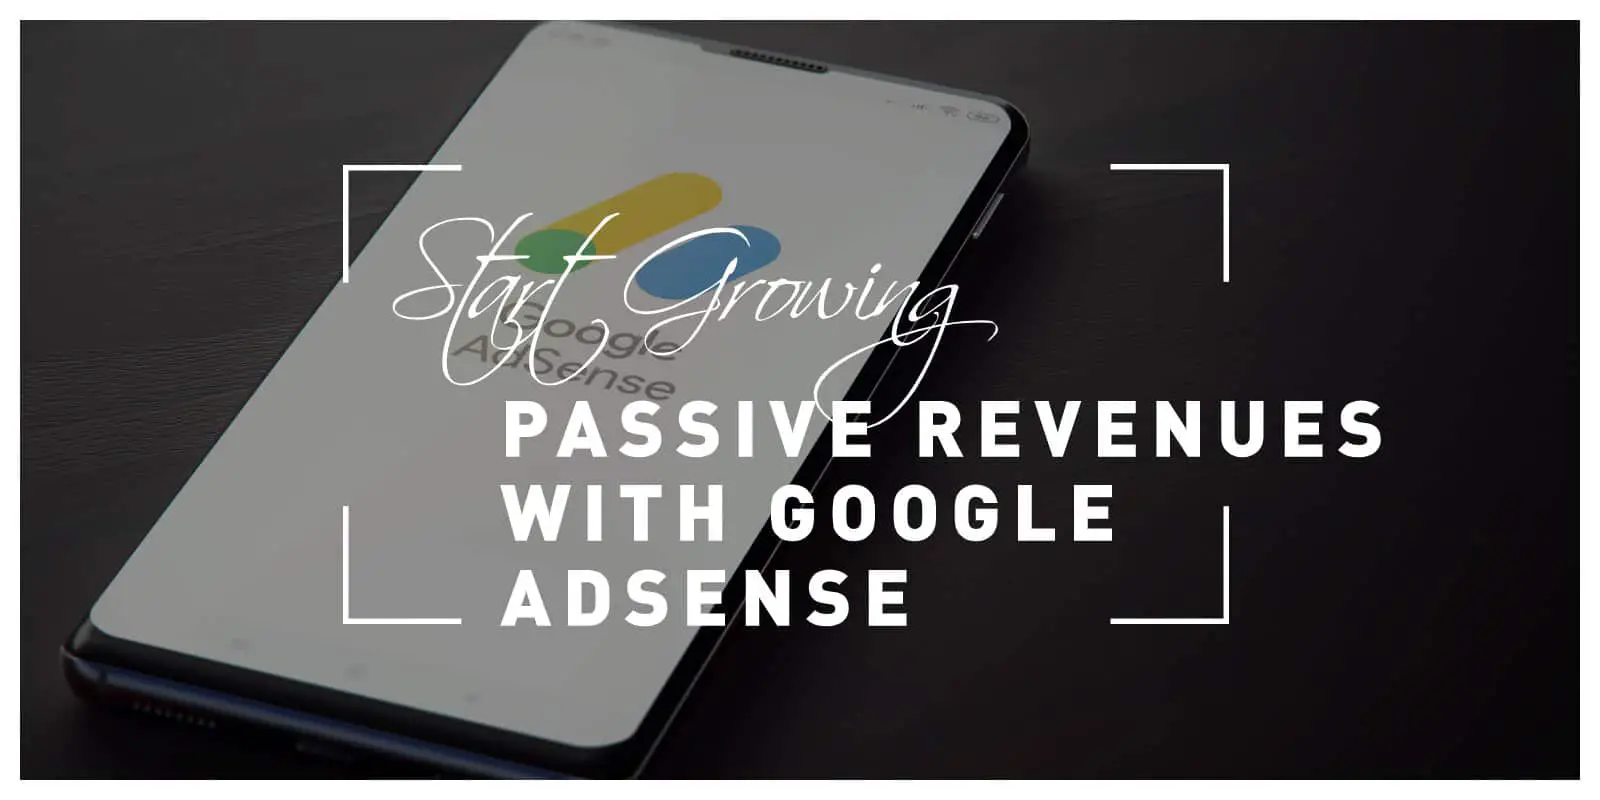 How to Start Growing Passive Revenues With Google Adsense